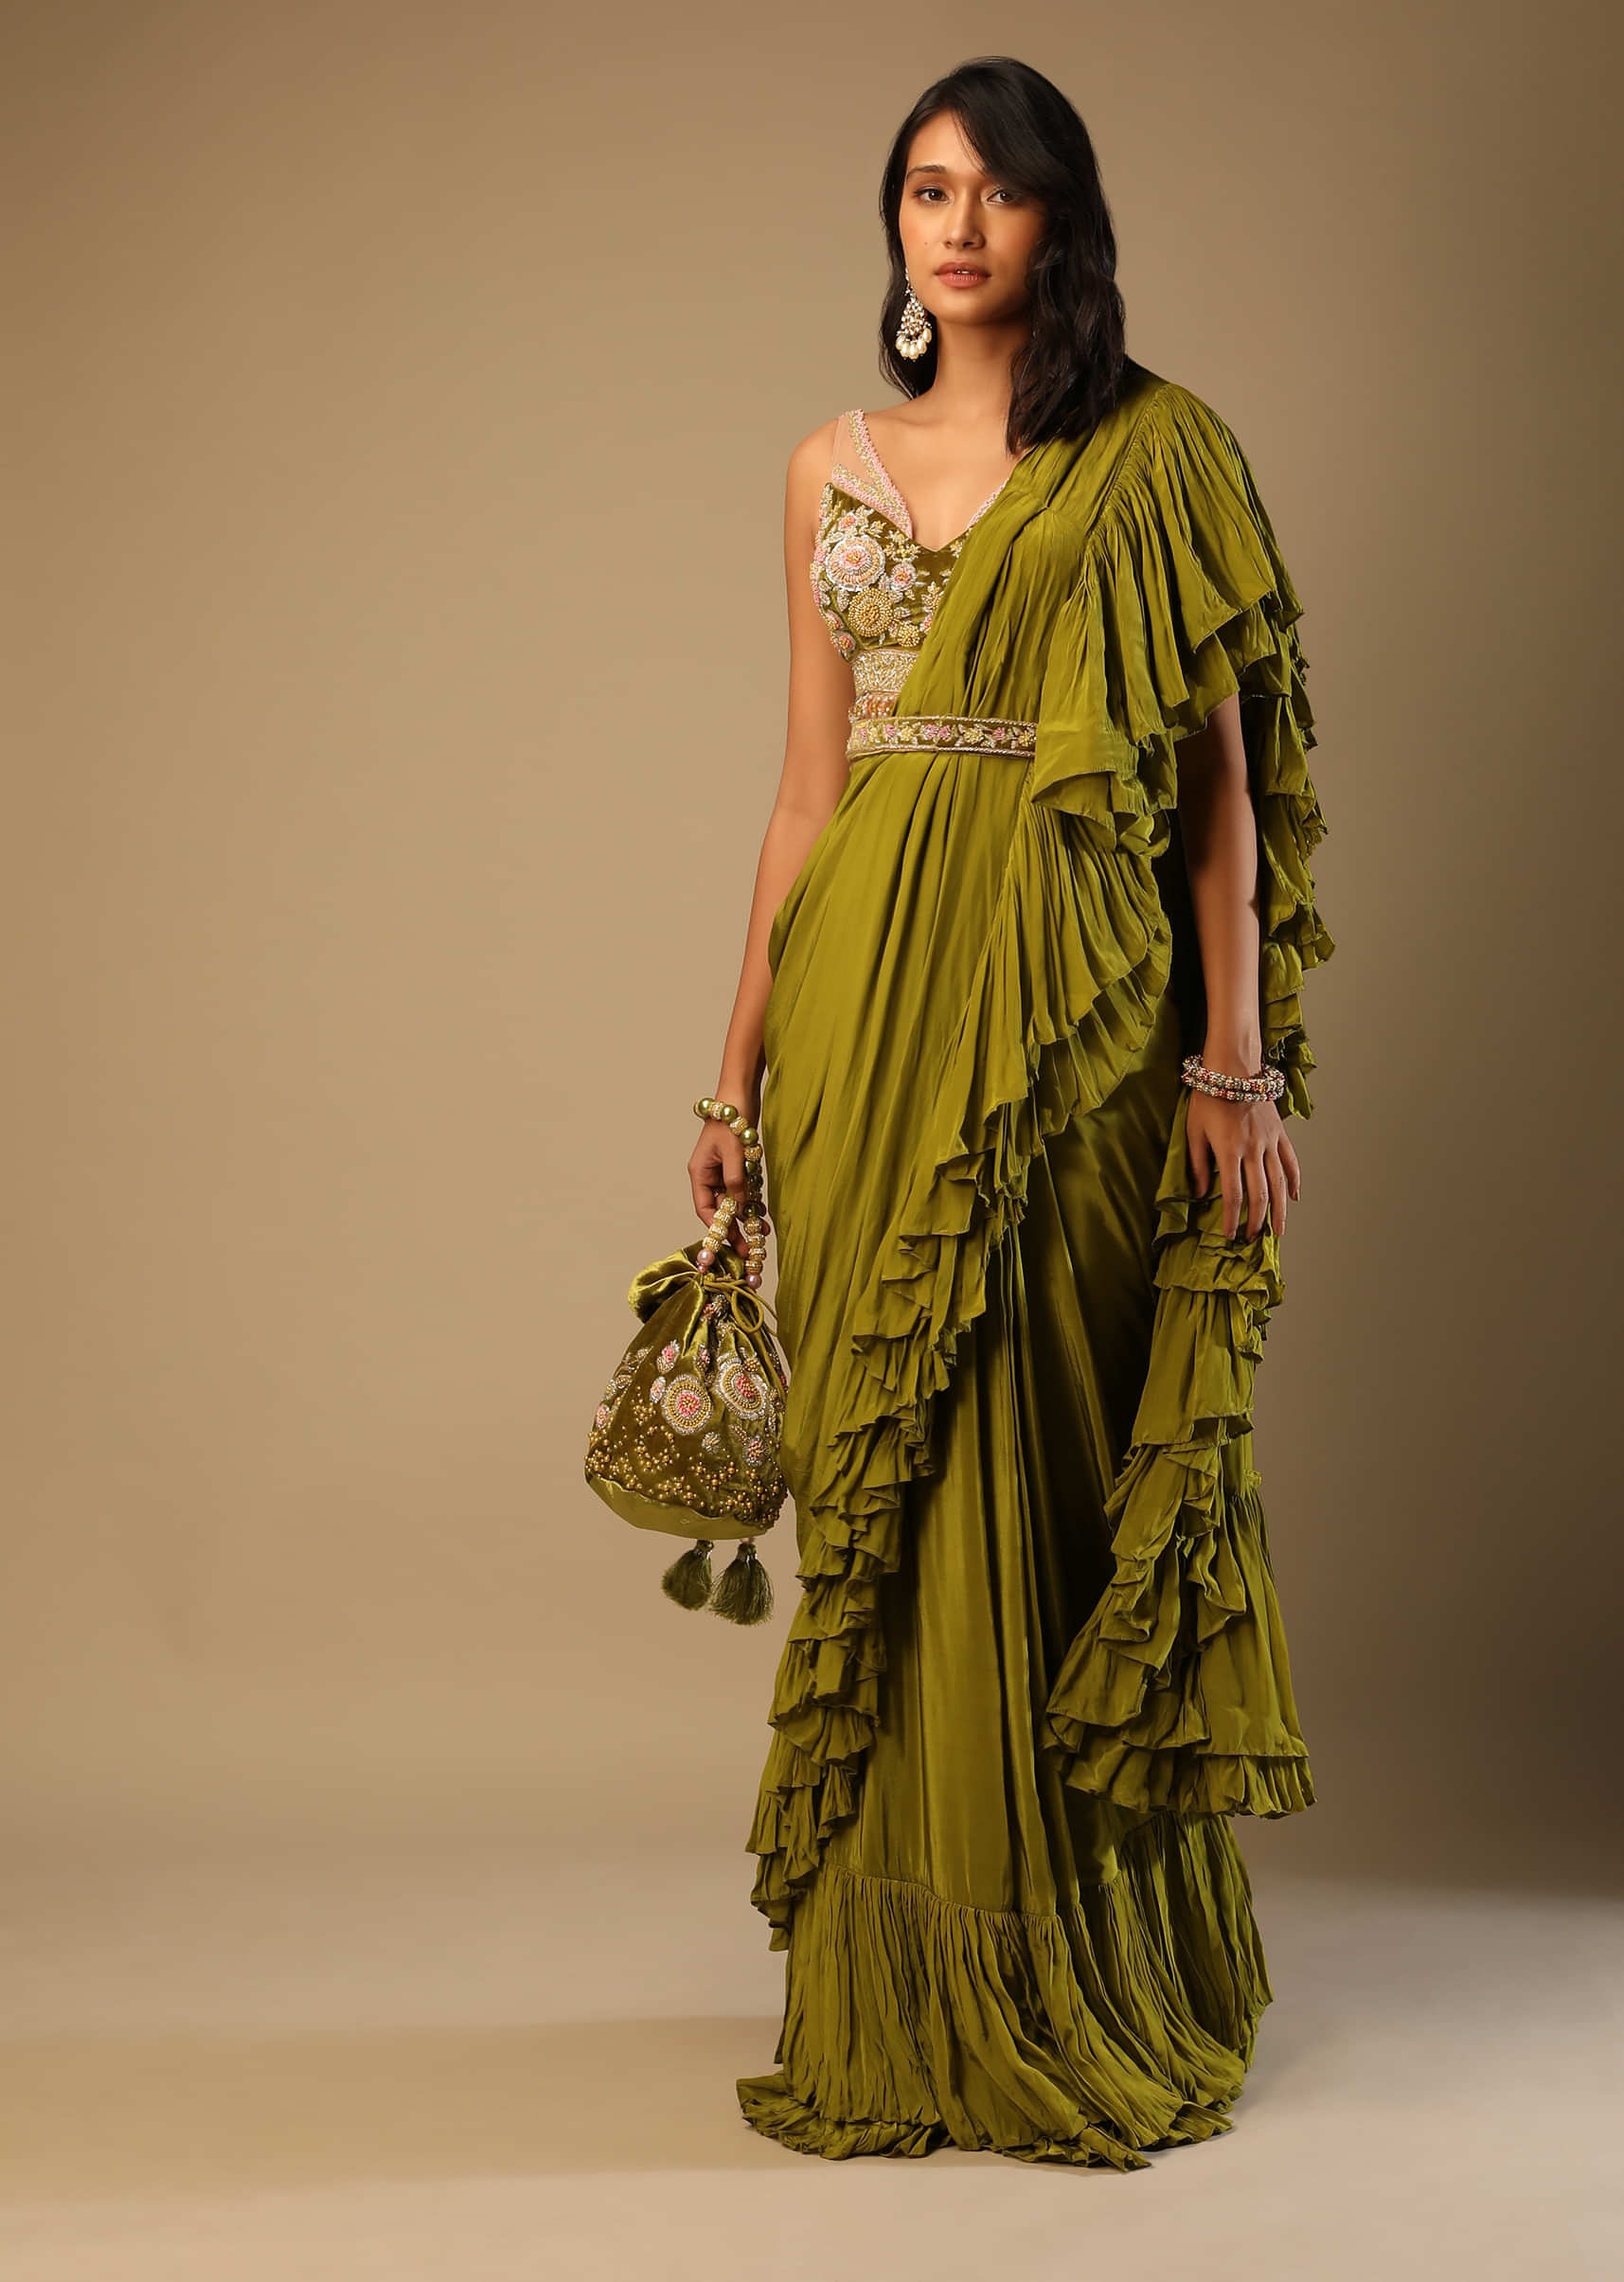 Moss Green Ready Pleated Ruffle Saree In Crepe With Multi Colored Hand Embroidered Floral Blouse 